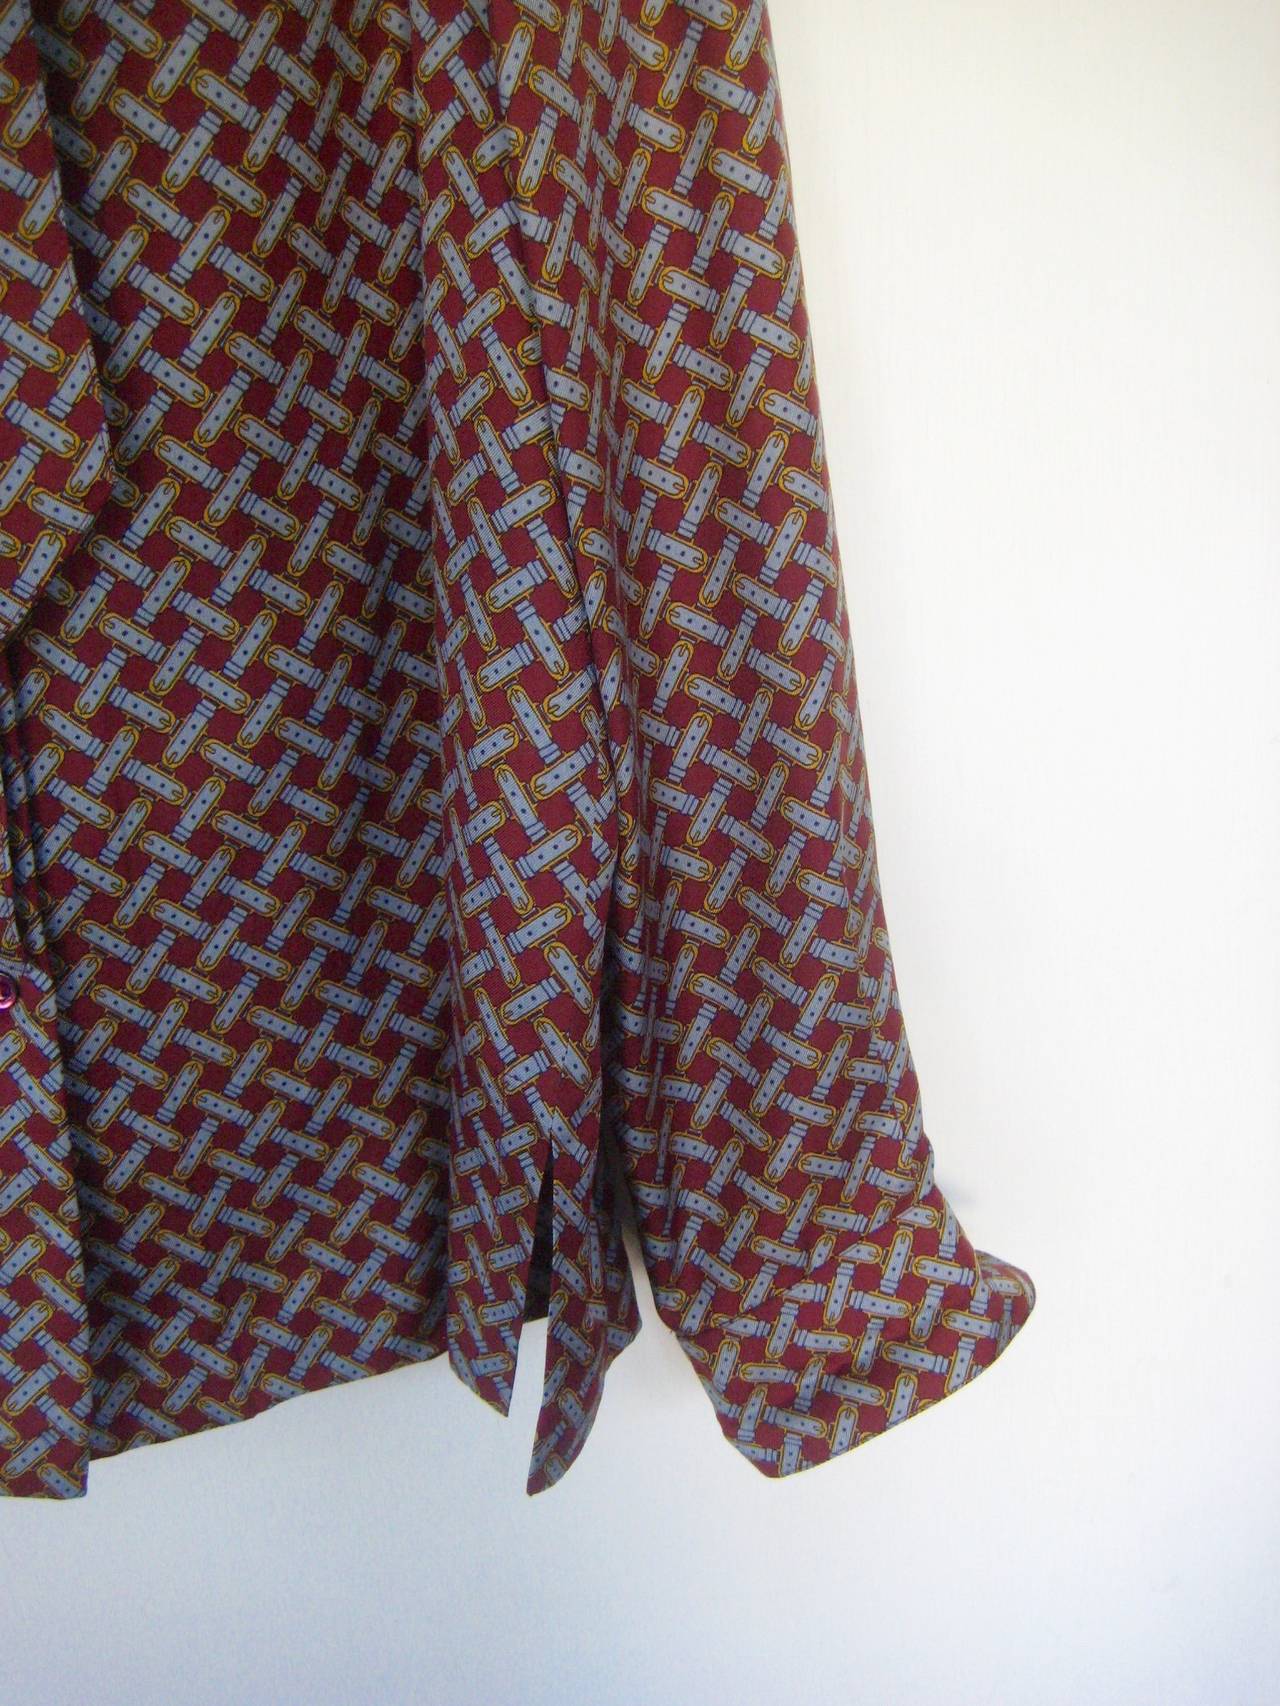 Vintage Hermes Buckle Print Blouse with Matching Twilly Tie For Sale 1